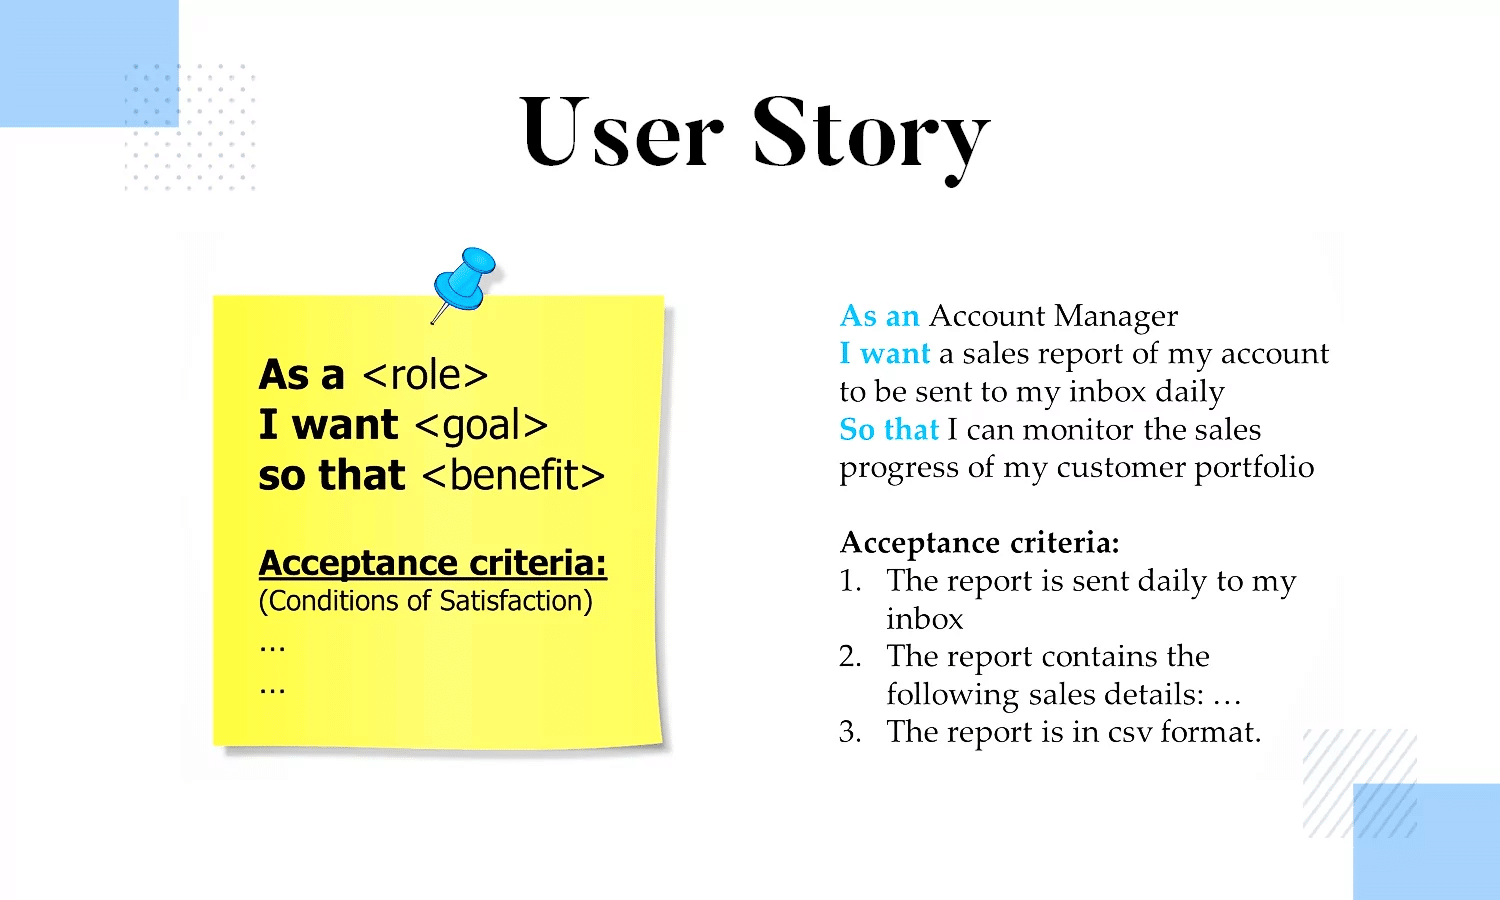 User Story Brief Overview